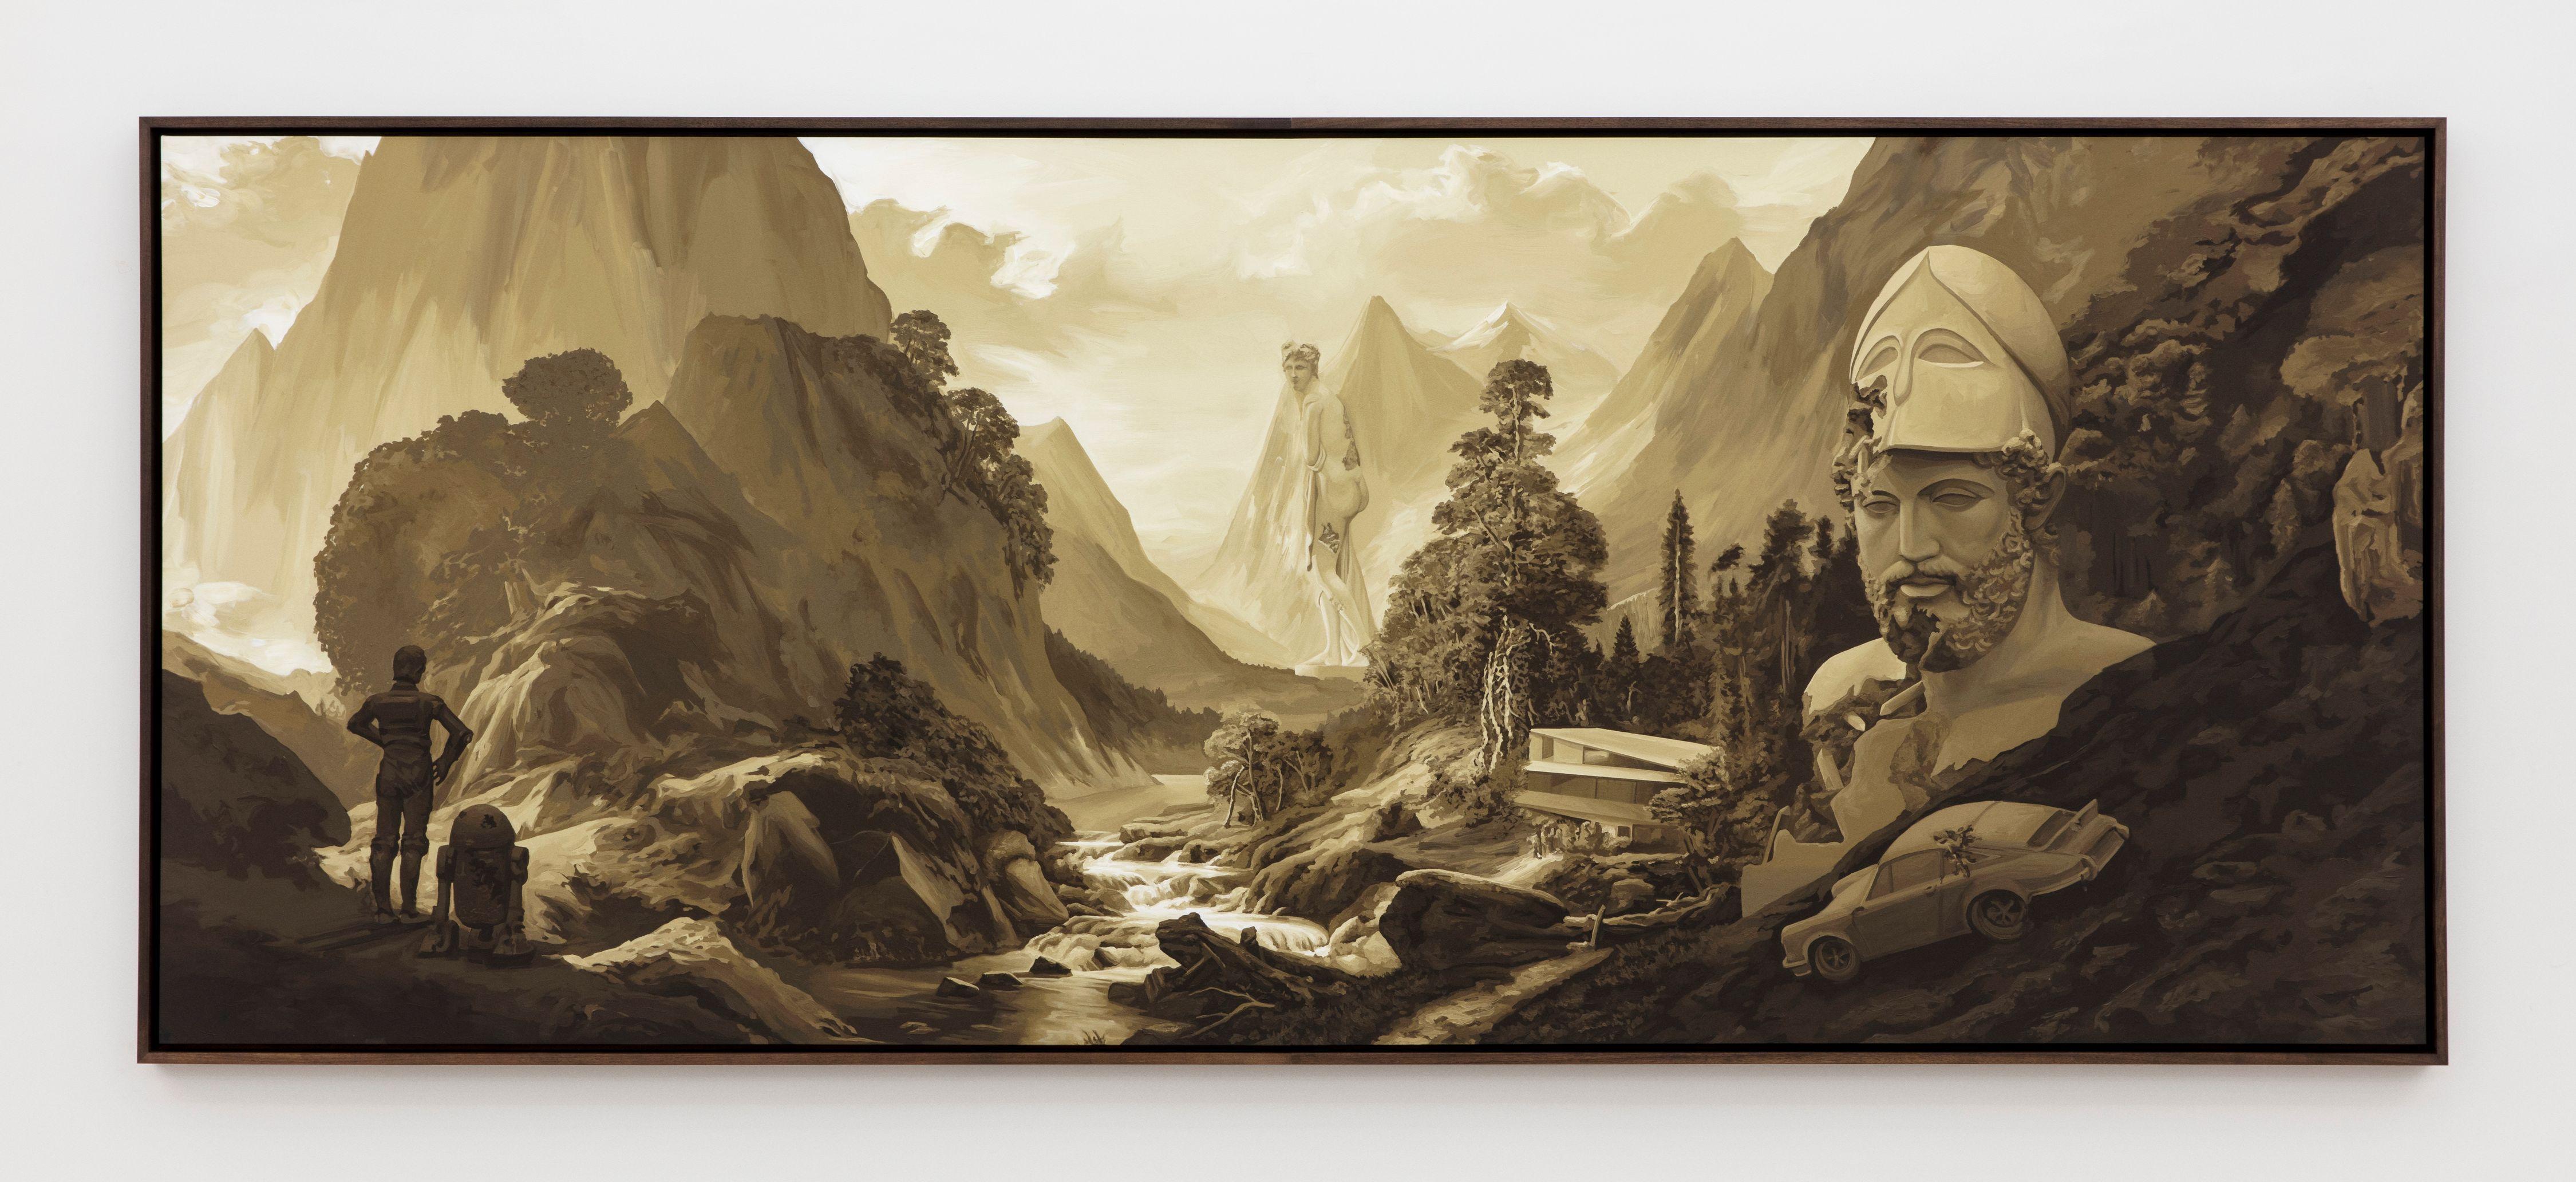 Daniel Arsham. Valley of the Sublime, Stubaital , 2023. Acrylic on canvas. Framed: 83 1/2 x 203 1/2 inch. Photographer: Guillaume Ziccarelli. Courtesy of the artist and Perrotin. 